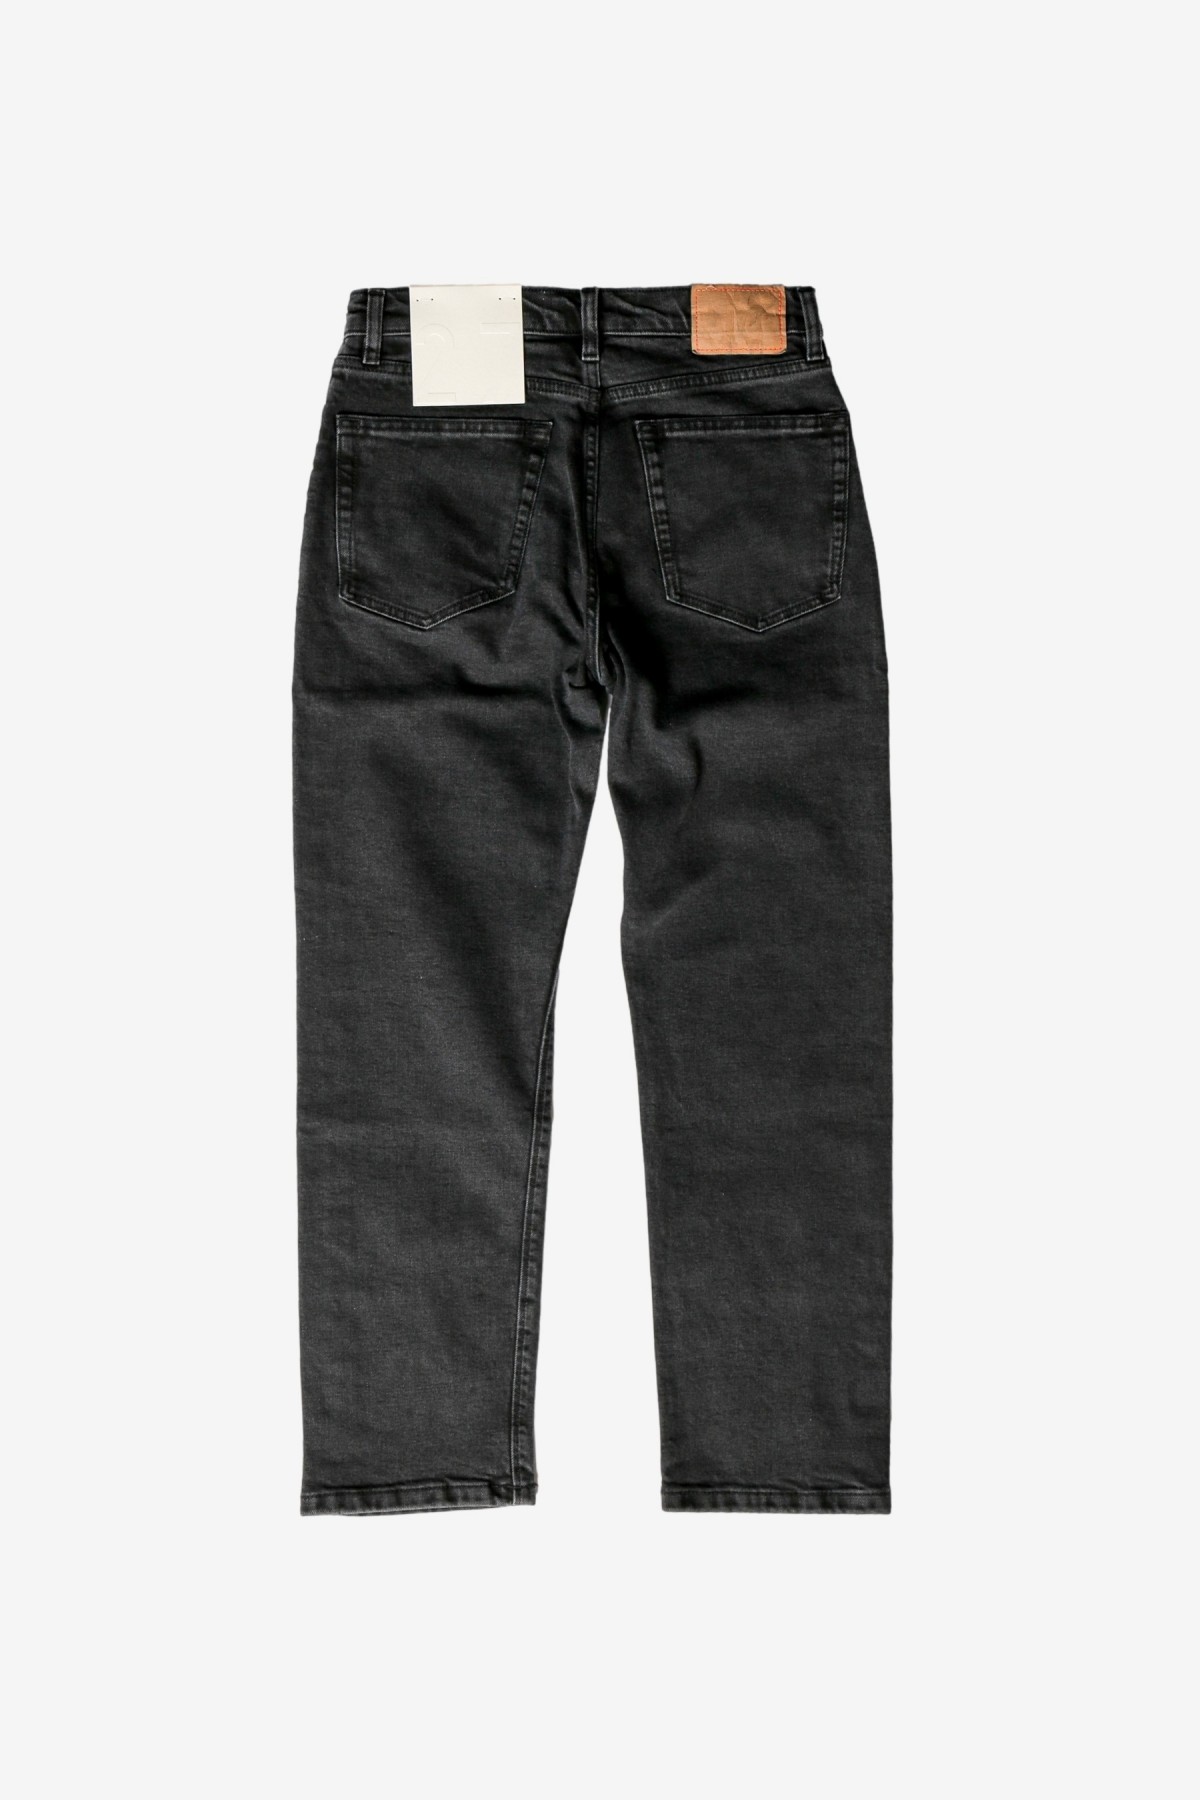 Jeanerica TM005 Tapered Fit Jeans in Black 2 Weeks